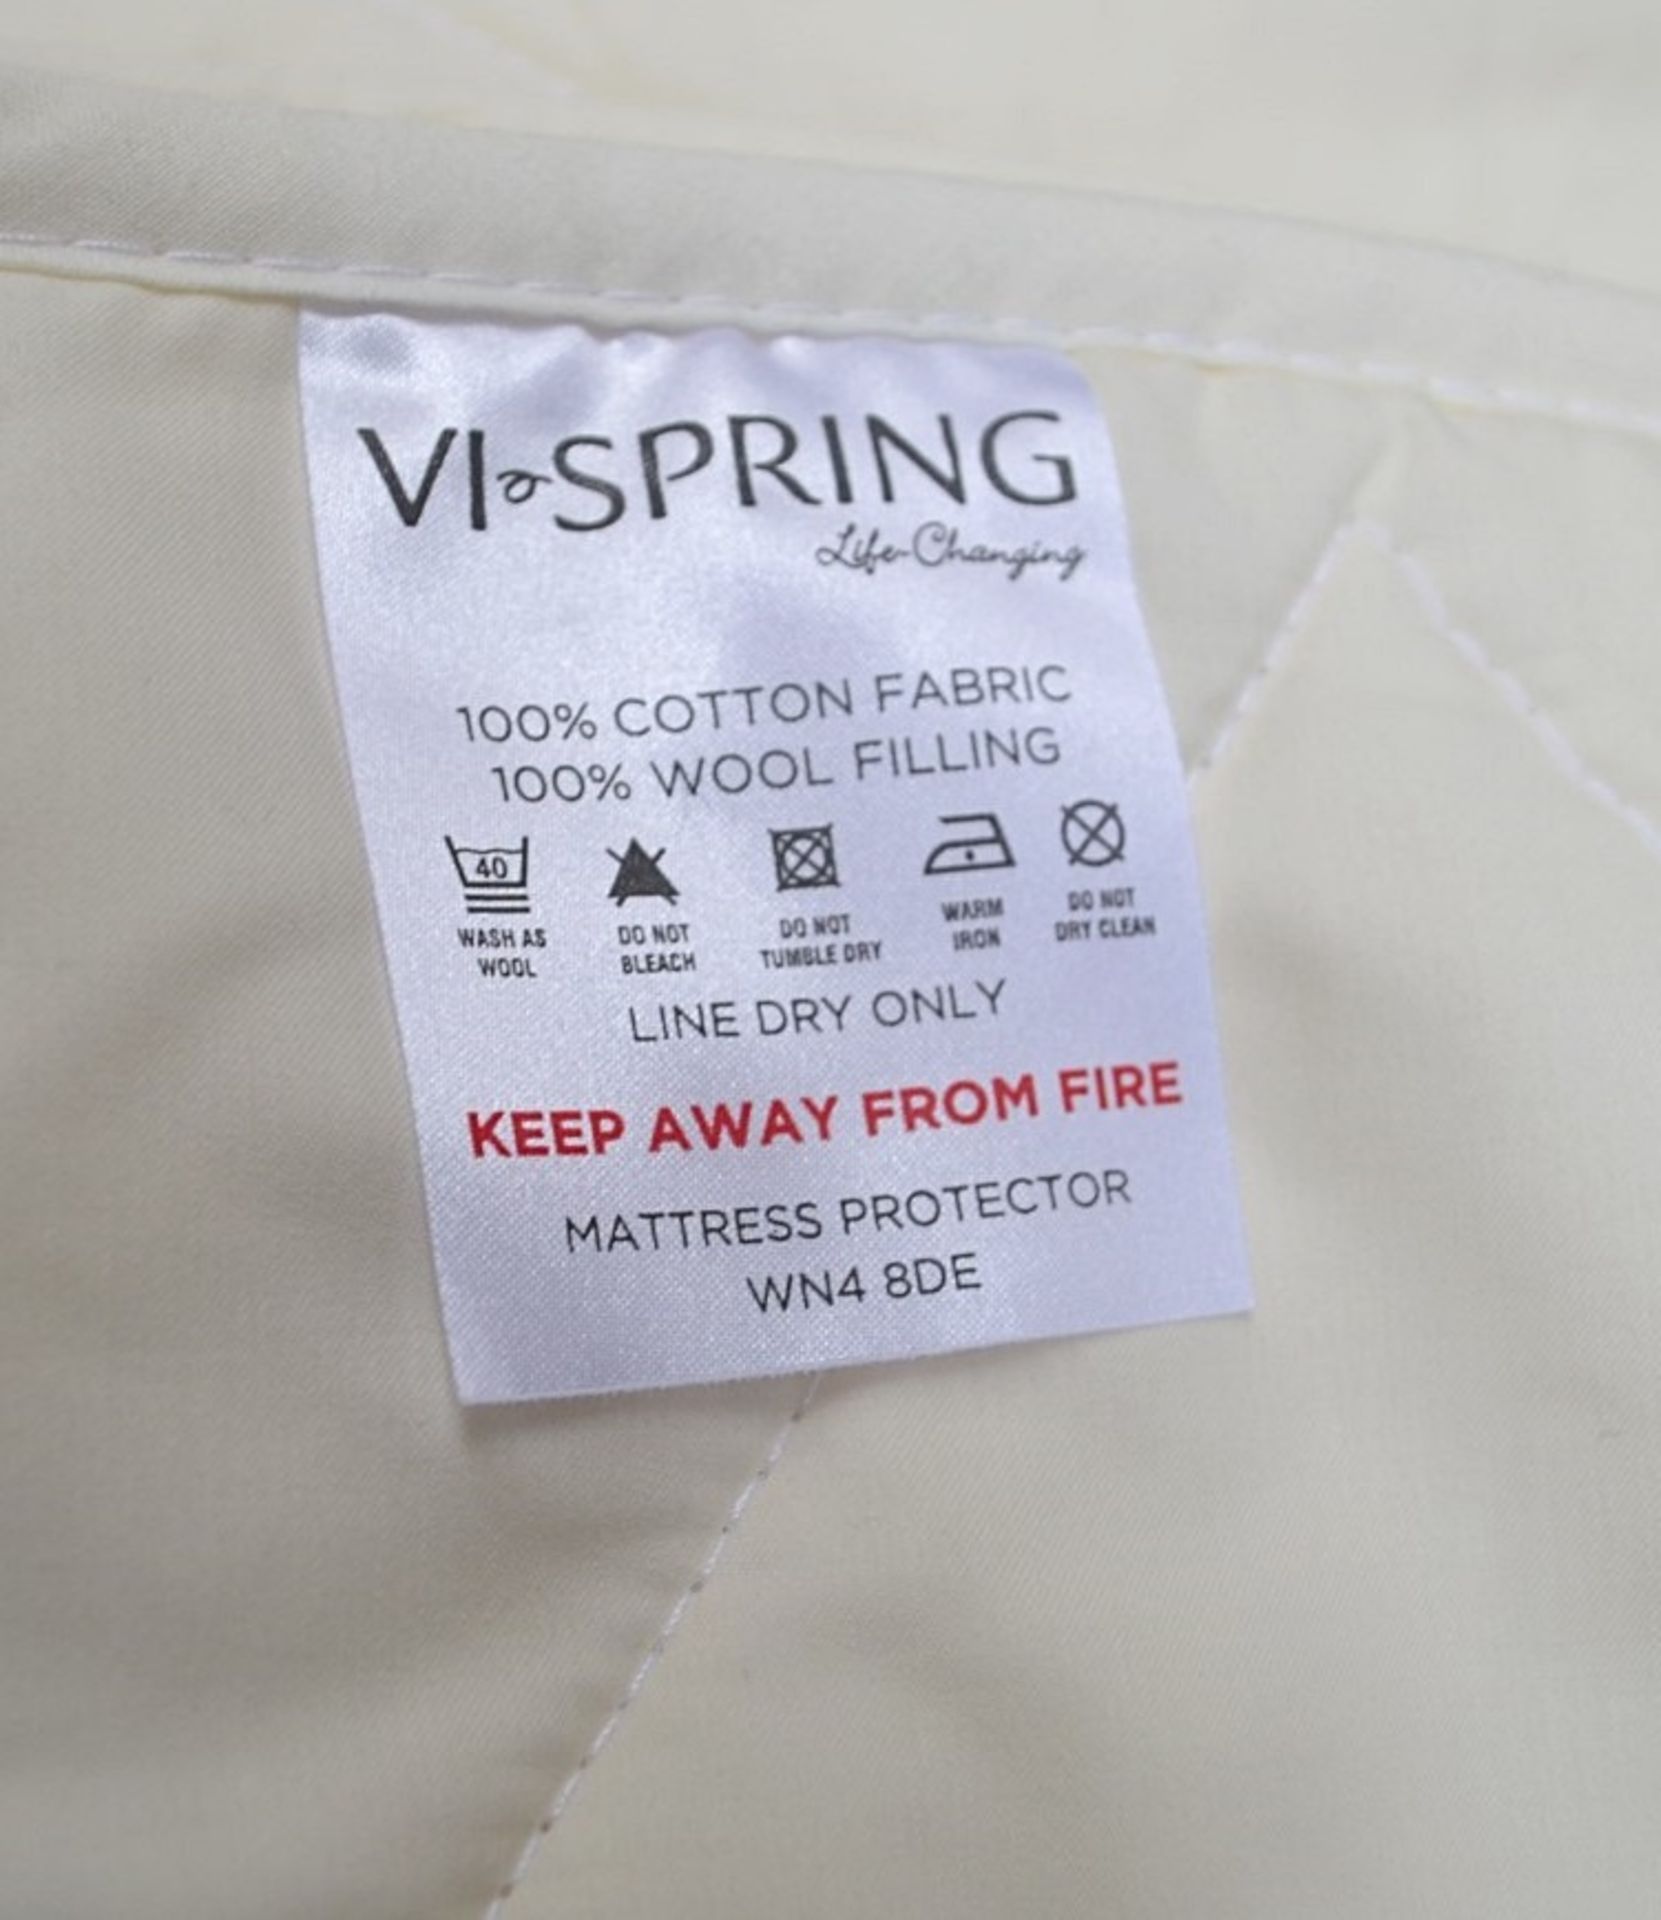 1 x VISPRING Quilted Mattress Protector - Dimensions 182x200cm - Ref: 1396831 P3 - CL087 - Location: - Image 3 of 4